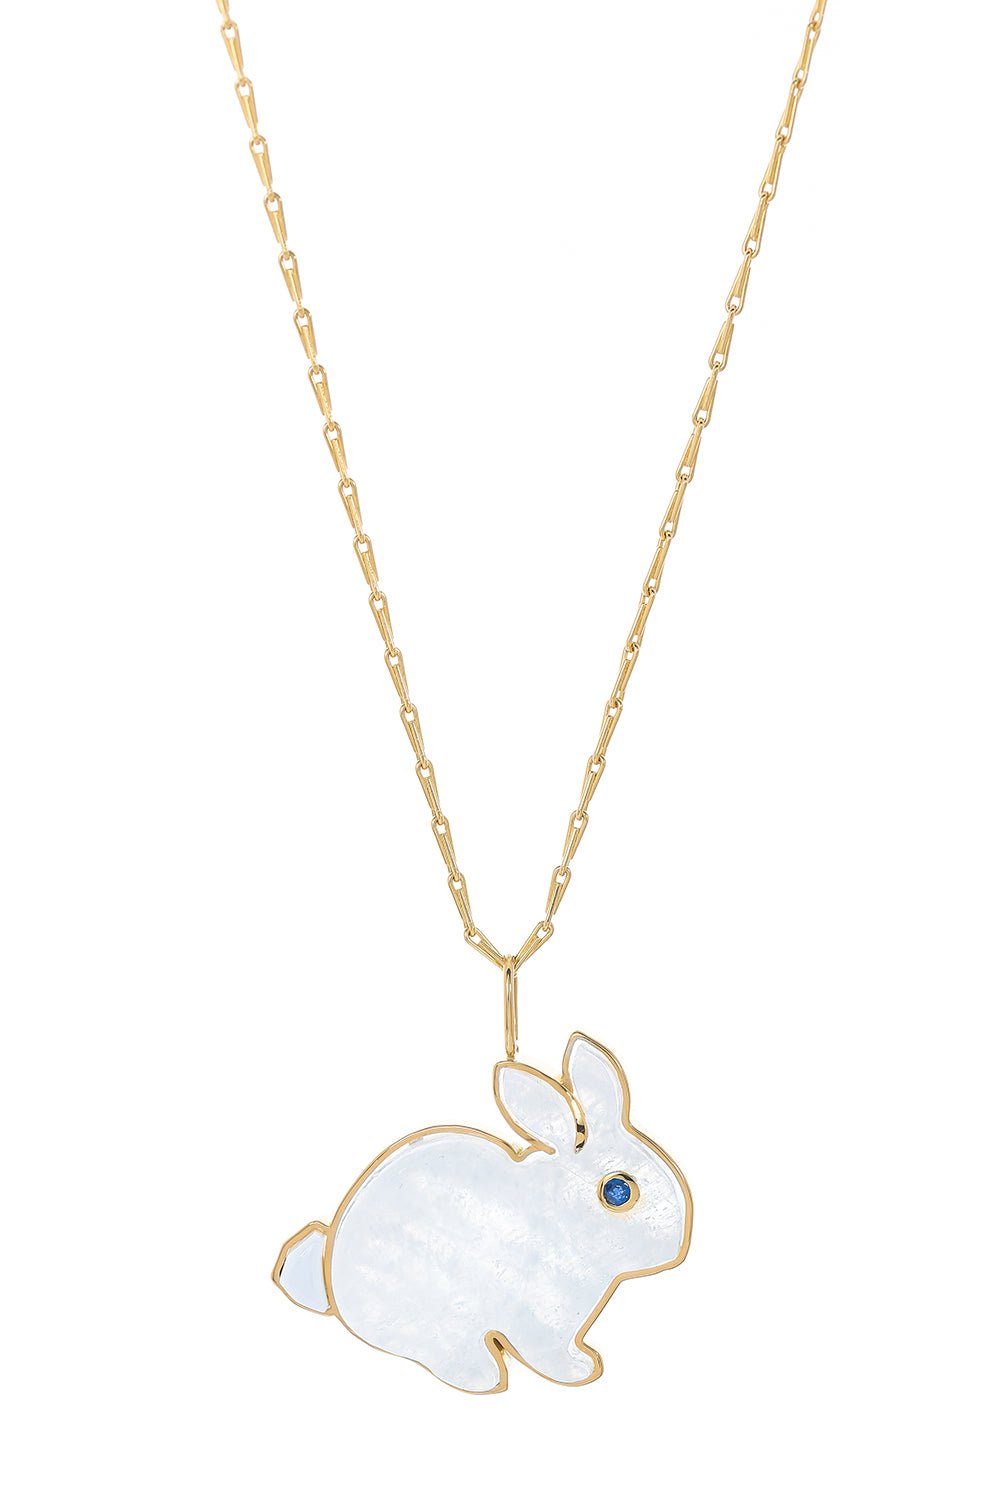 BRENT NEALE-Large Moonstone Bunny Pendant Necklace-YELLOW GOLD